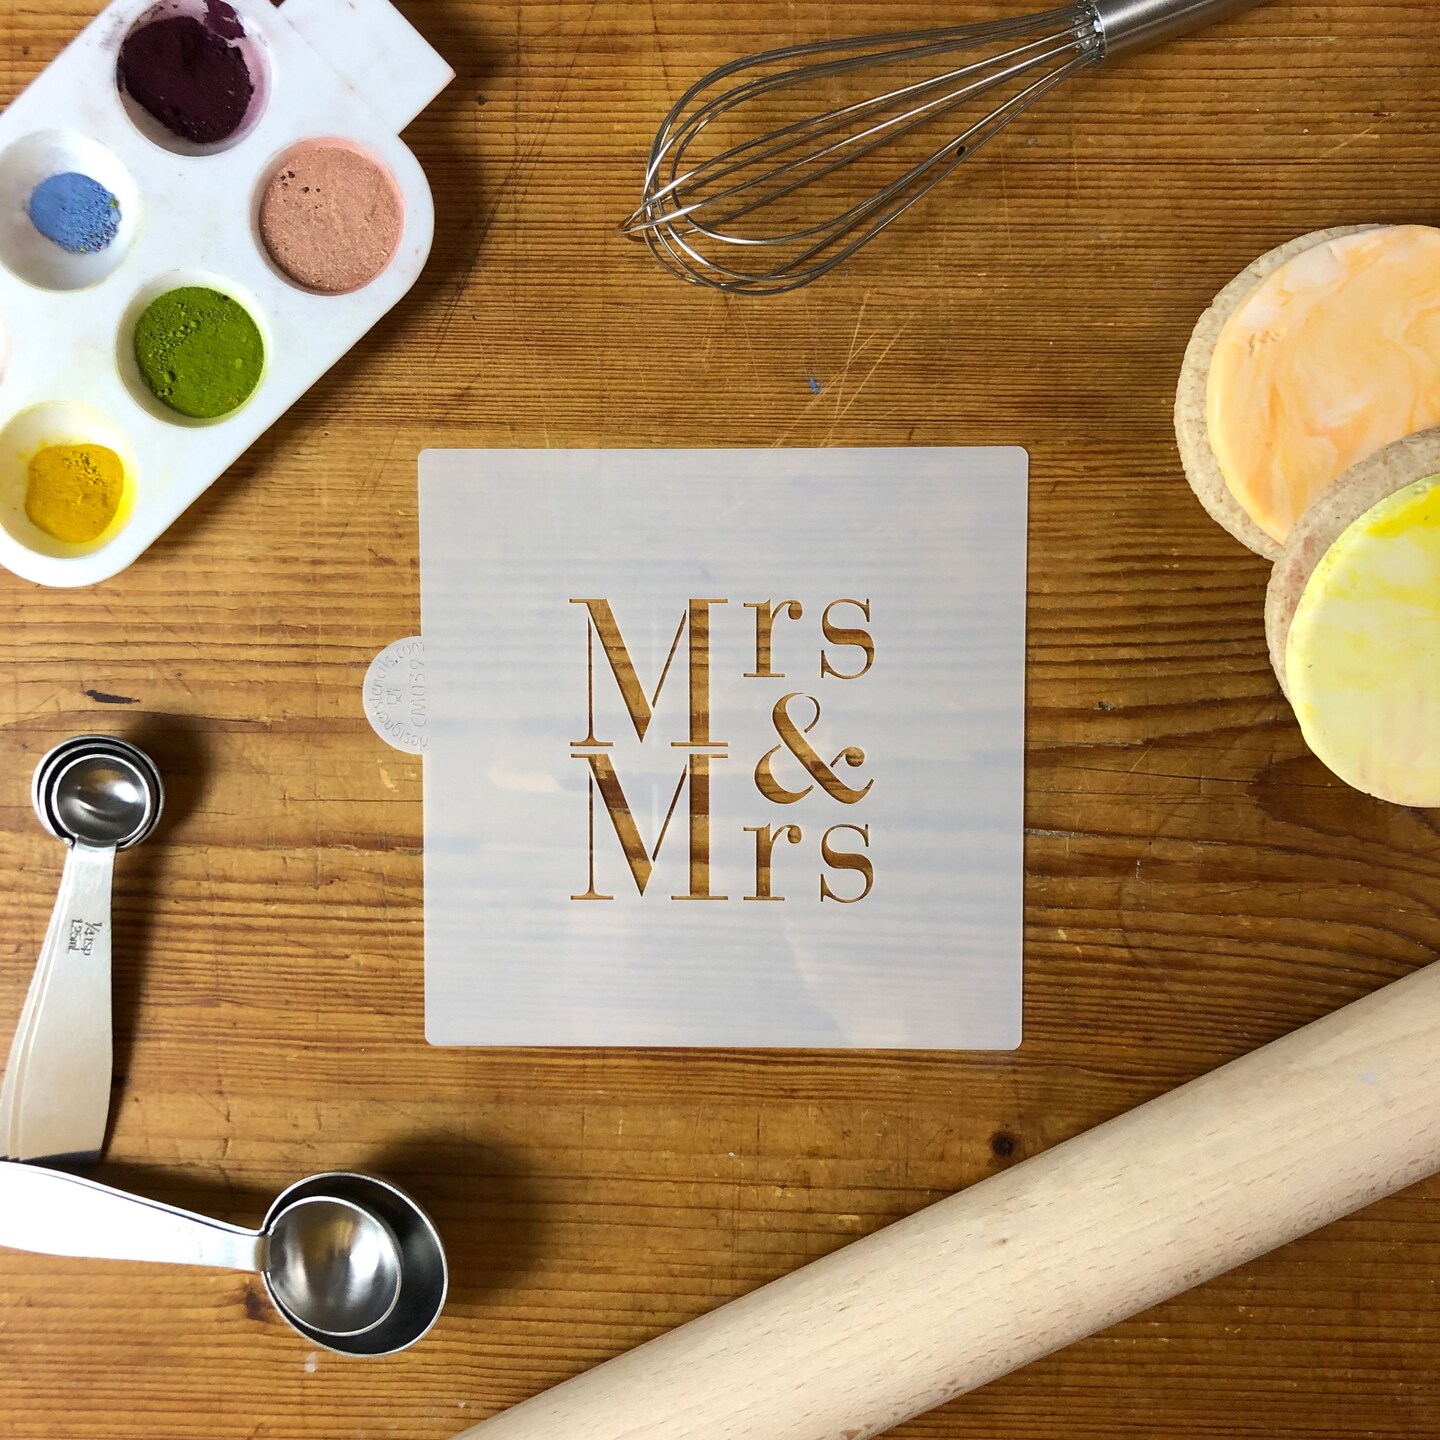 Mrs &#x26; Mrs Cookie &#x26; Craft Stencil | CM039 by Designer Stencils | Cookie Decorating Tools | Baking Stencils for Royal Icing, Airbrush, Dusting Powder | Craft Stencils for Canvas, Paper, Wood | Reusable Food Grade Stencil